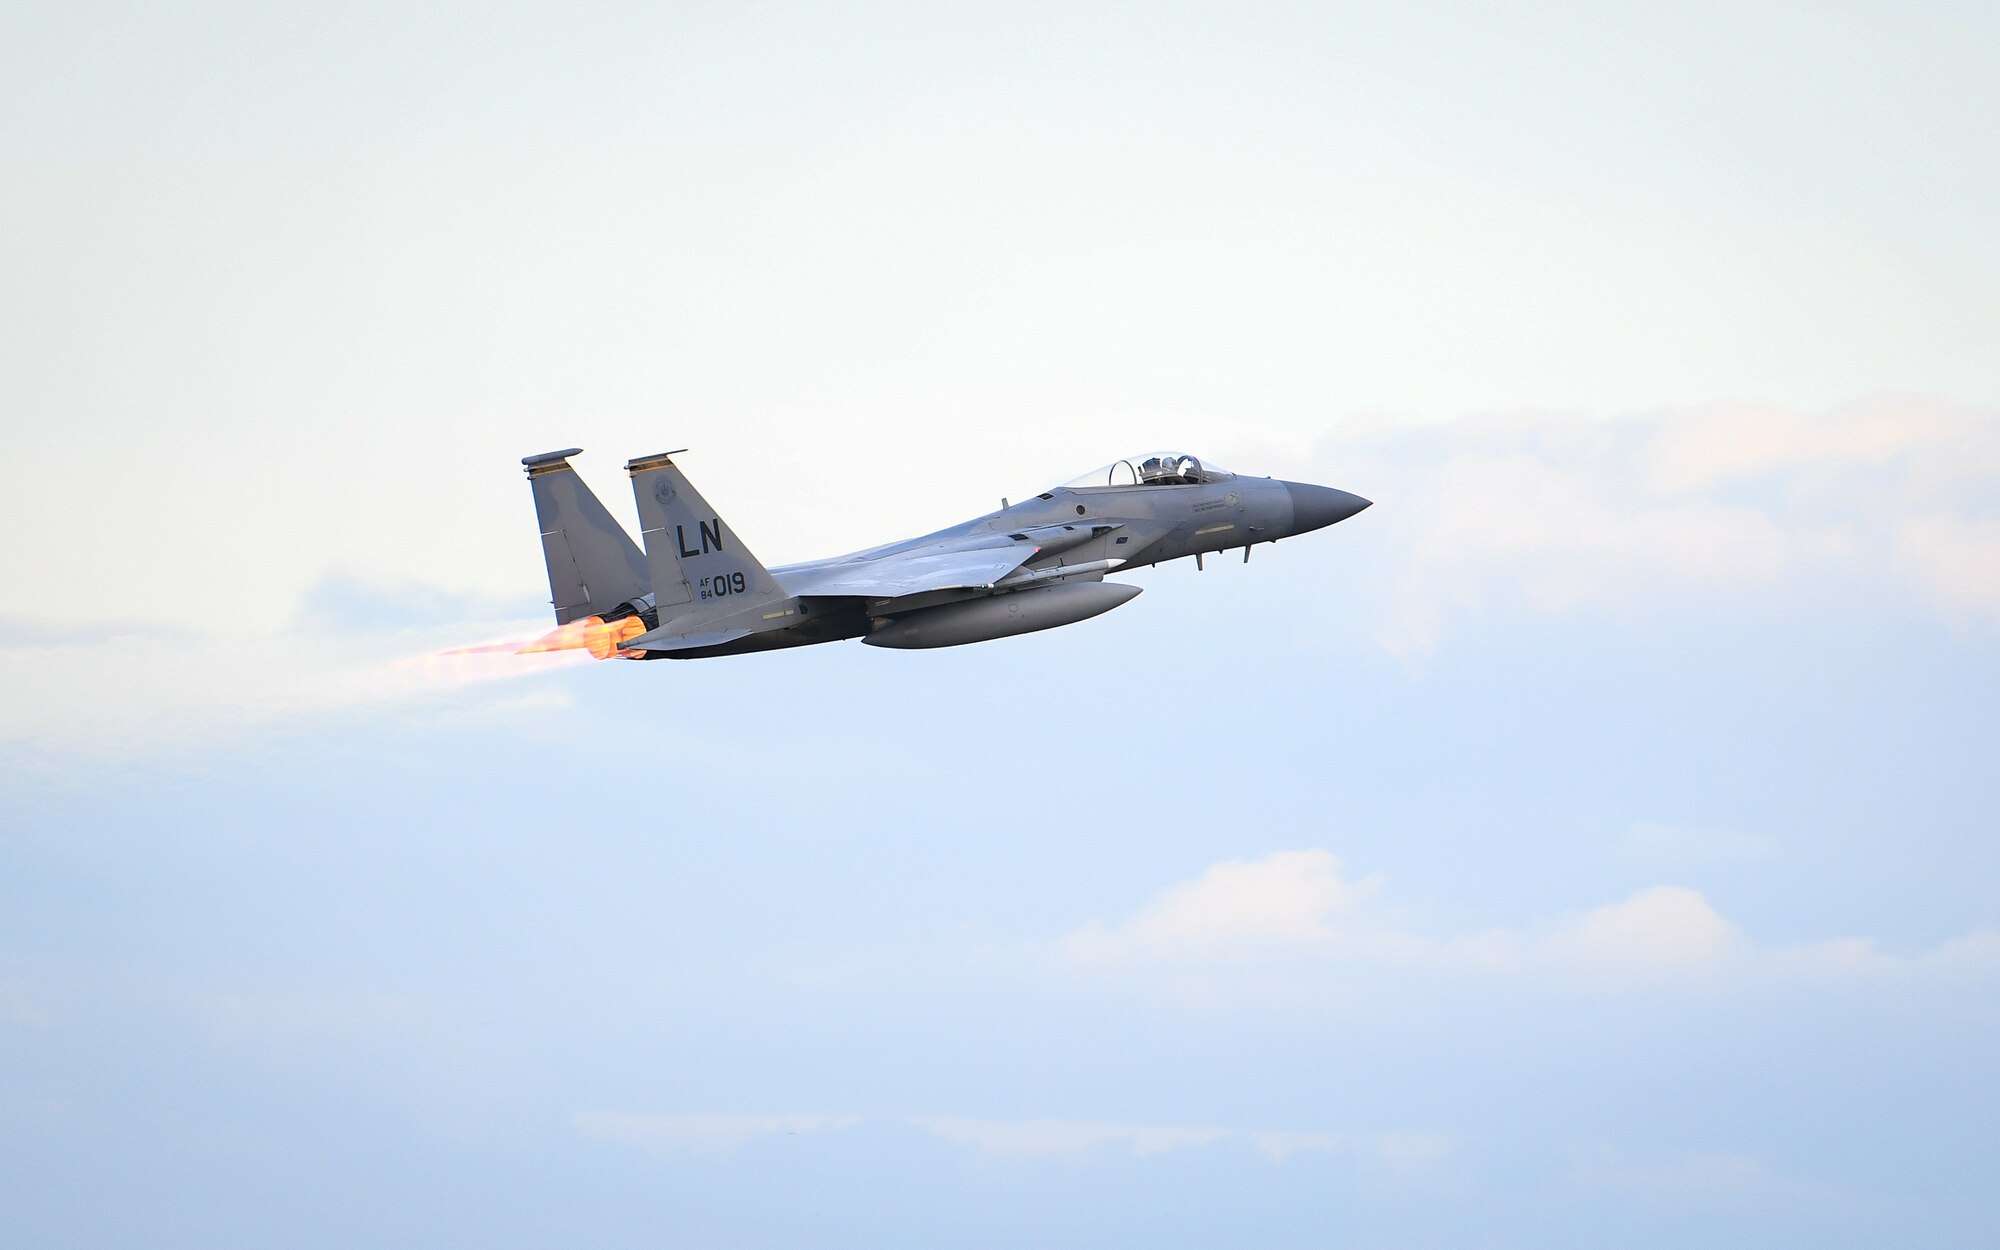 An F-15C Eagle assigned to the 493rd Fighter Squadron takes off for the first time in the new year at Royal Air Force Lakenheath, England, Jan. 5, 2021. The 48th Fighter Wing conducts daily flying operations in order to ensure the Liberty Wing can deliver unique air combat capabilities when called upon by its NATO allies. (U.S. Air Force photo by Senior Airman Madeline Herzog)